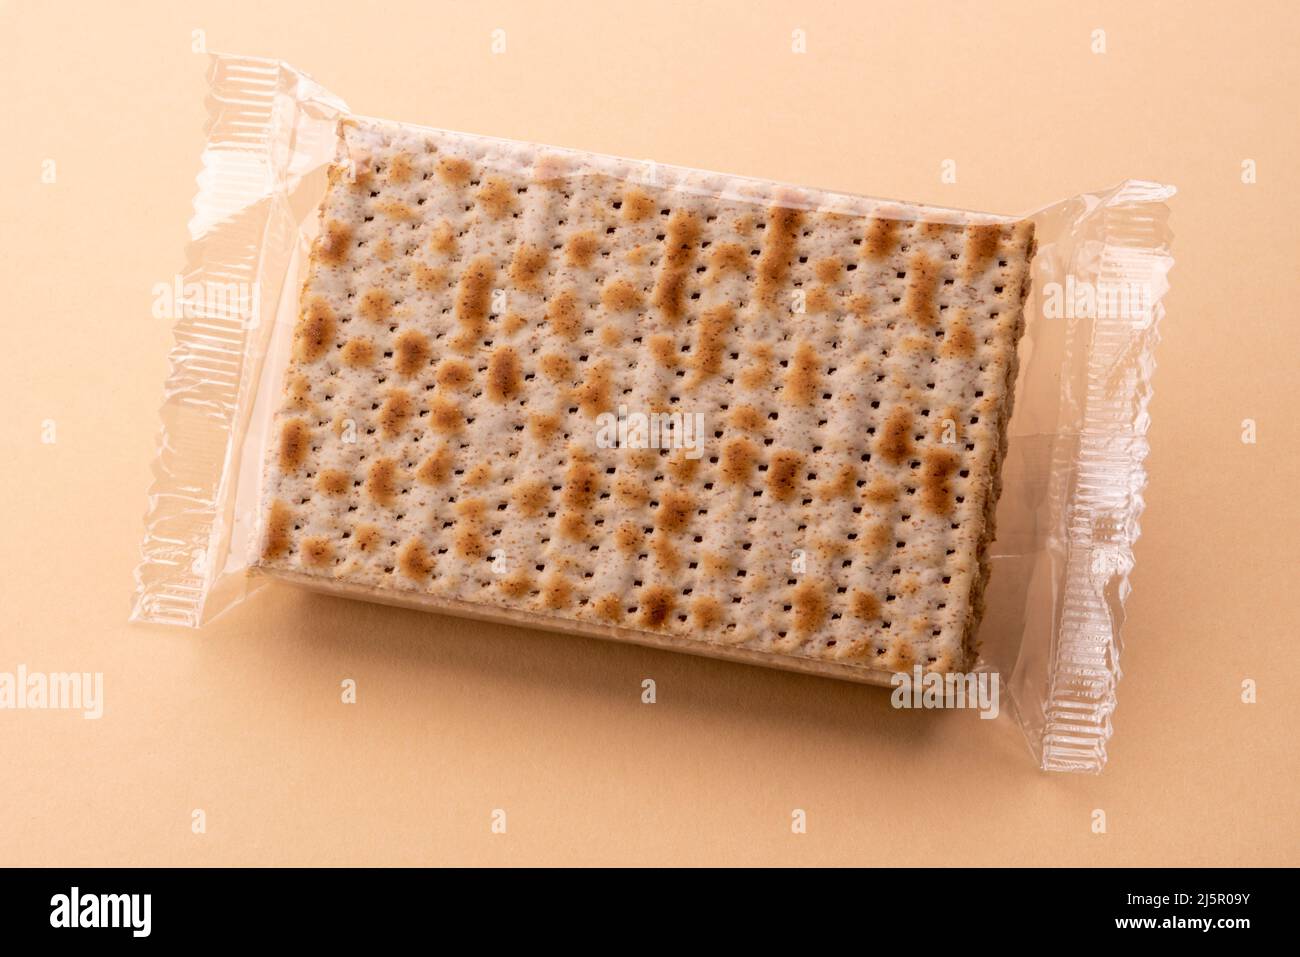 Unleavened matzo in sealed package, bread for Pesach, Jewish holiday of Passover. Matzah flatbreads on light brown background Stock Photo